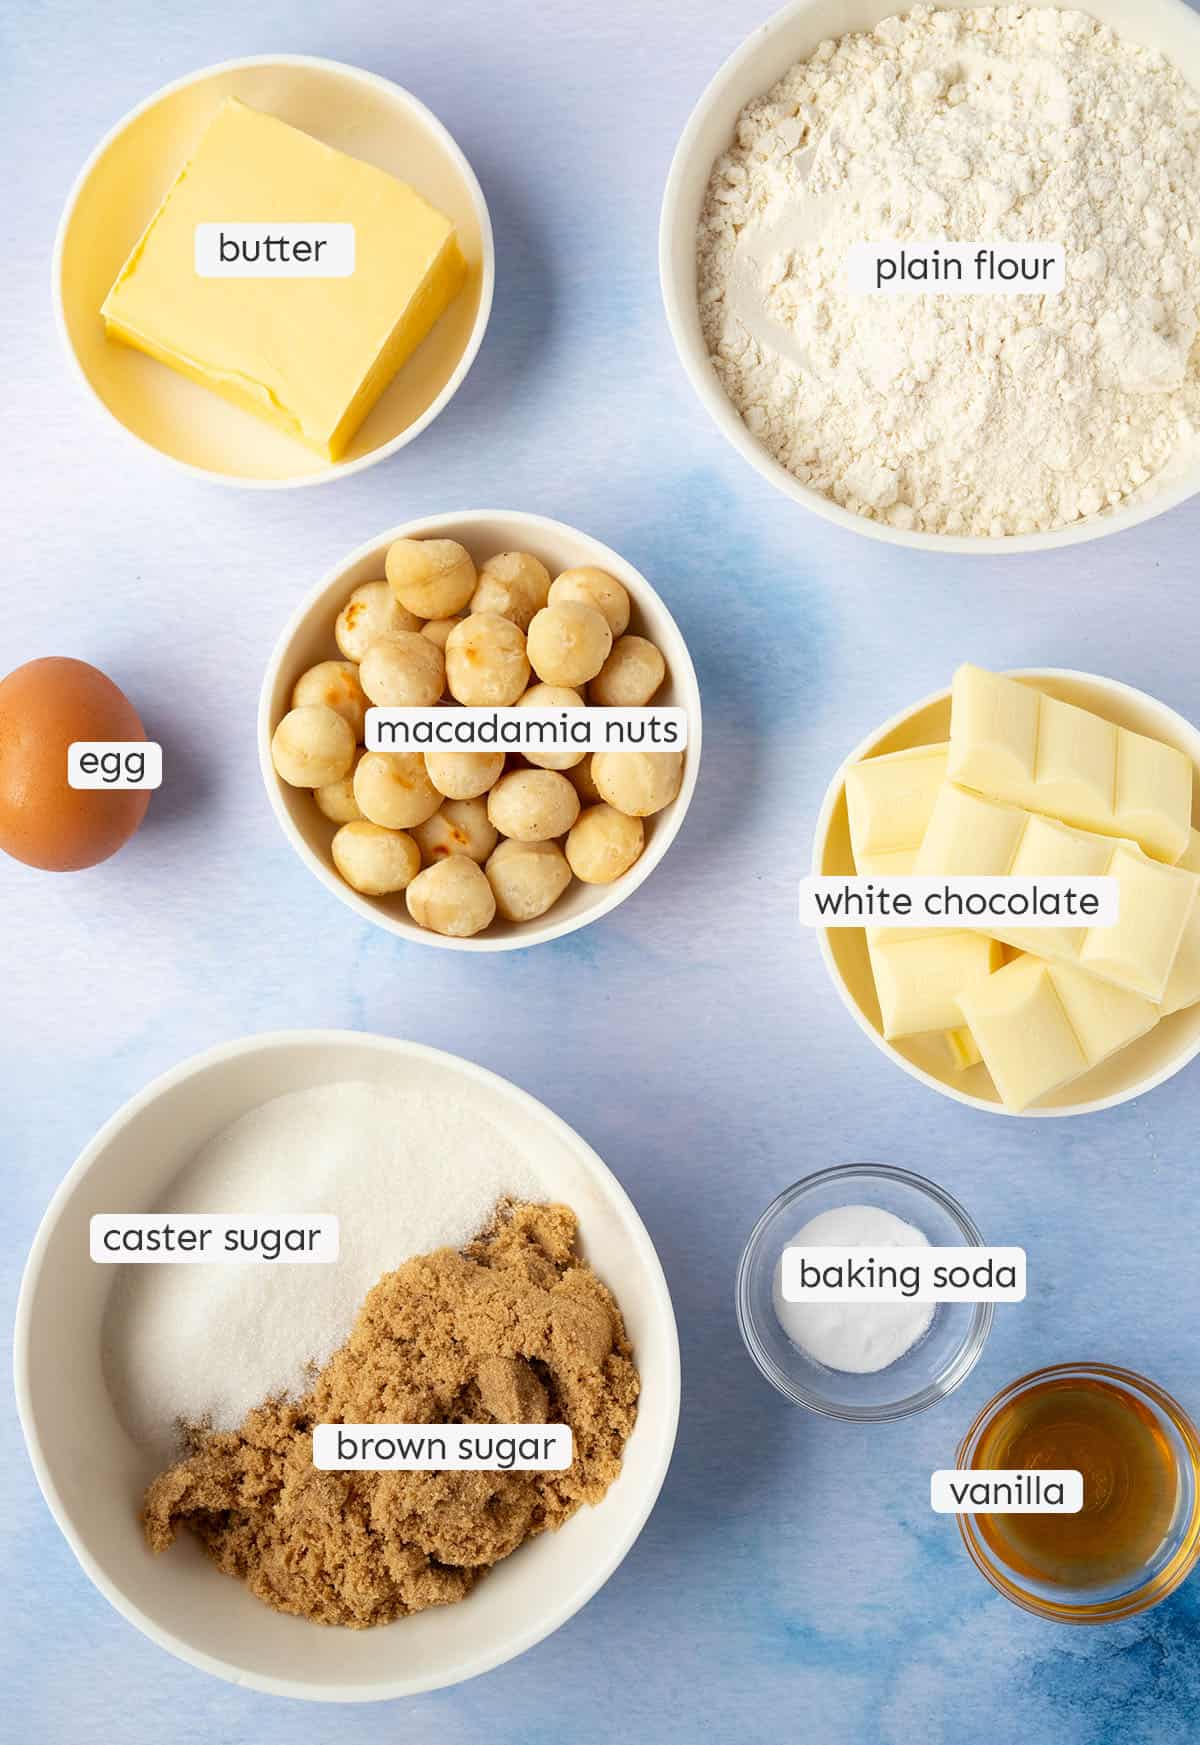 All the ingredients needed to make white chocolate macadamia cookies from scratch.